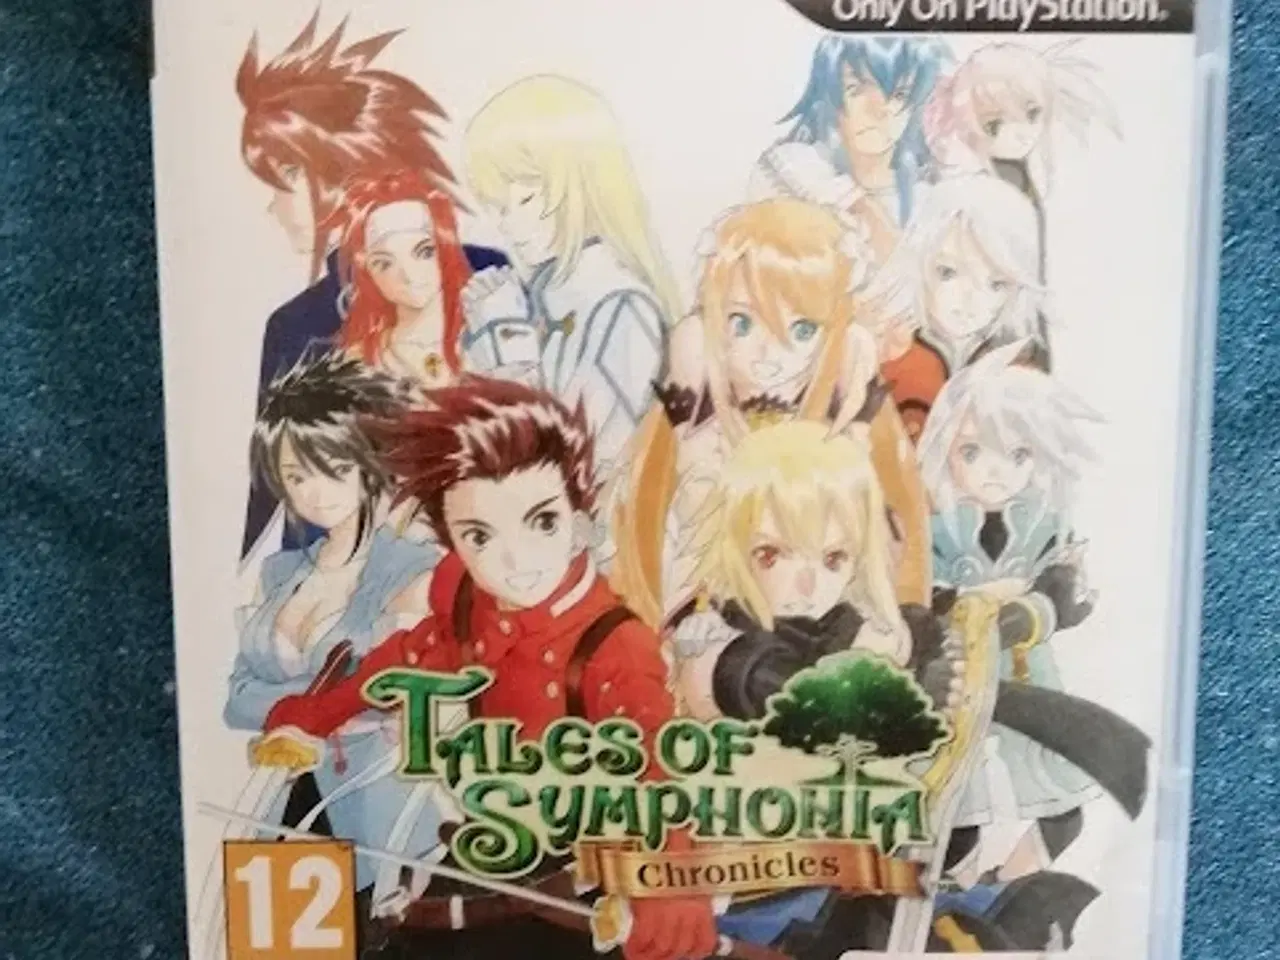 Billede 1 - Tales of Symphonia Chronicles